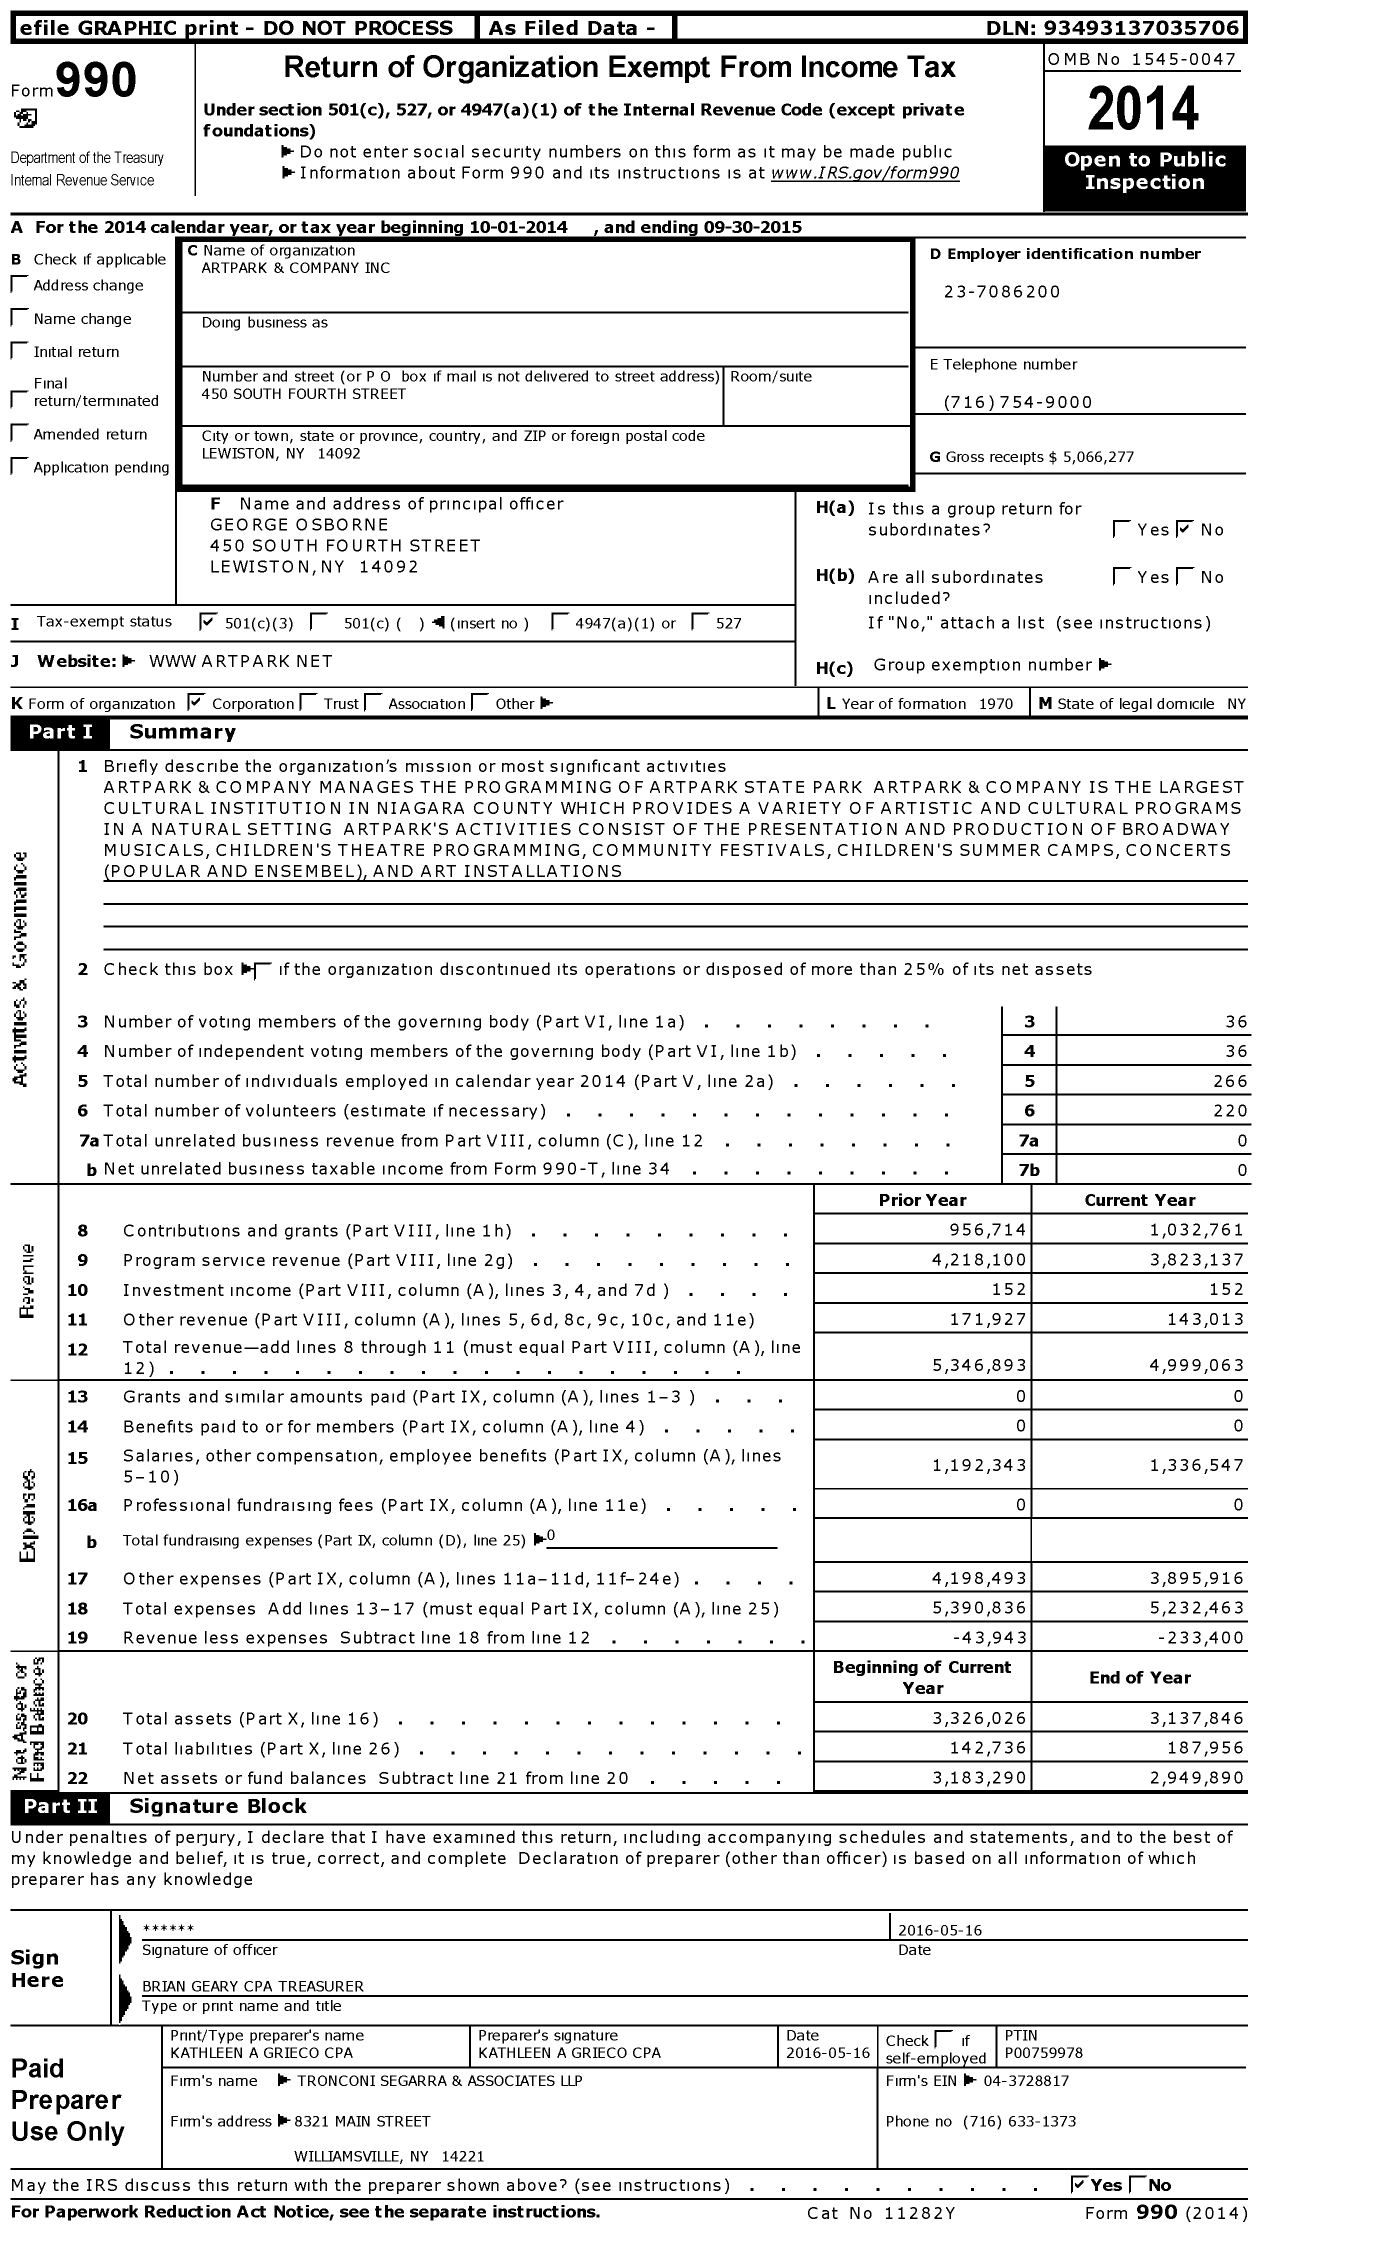 Image of first page of 2014 Form 990 for Artpark and Company